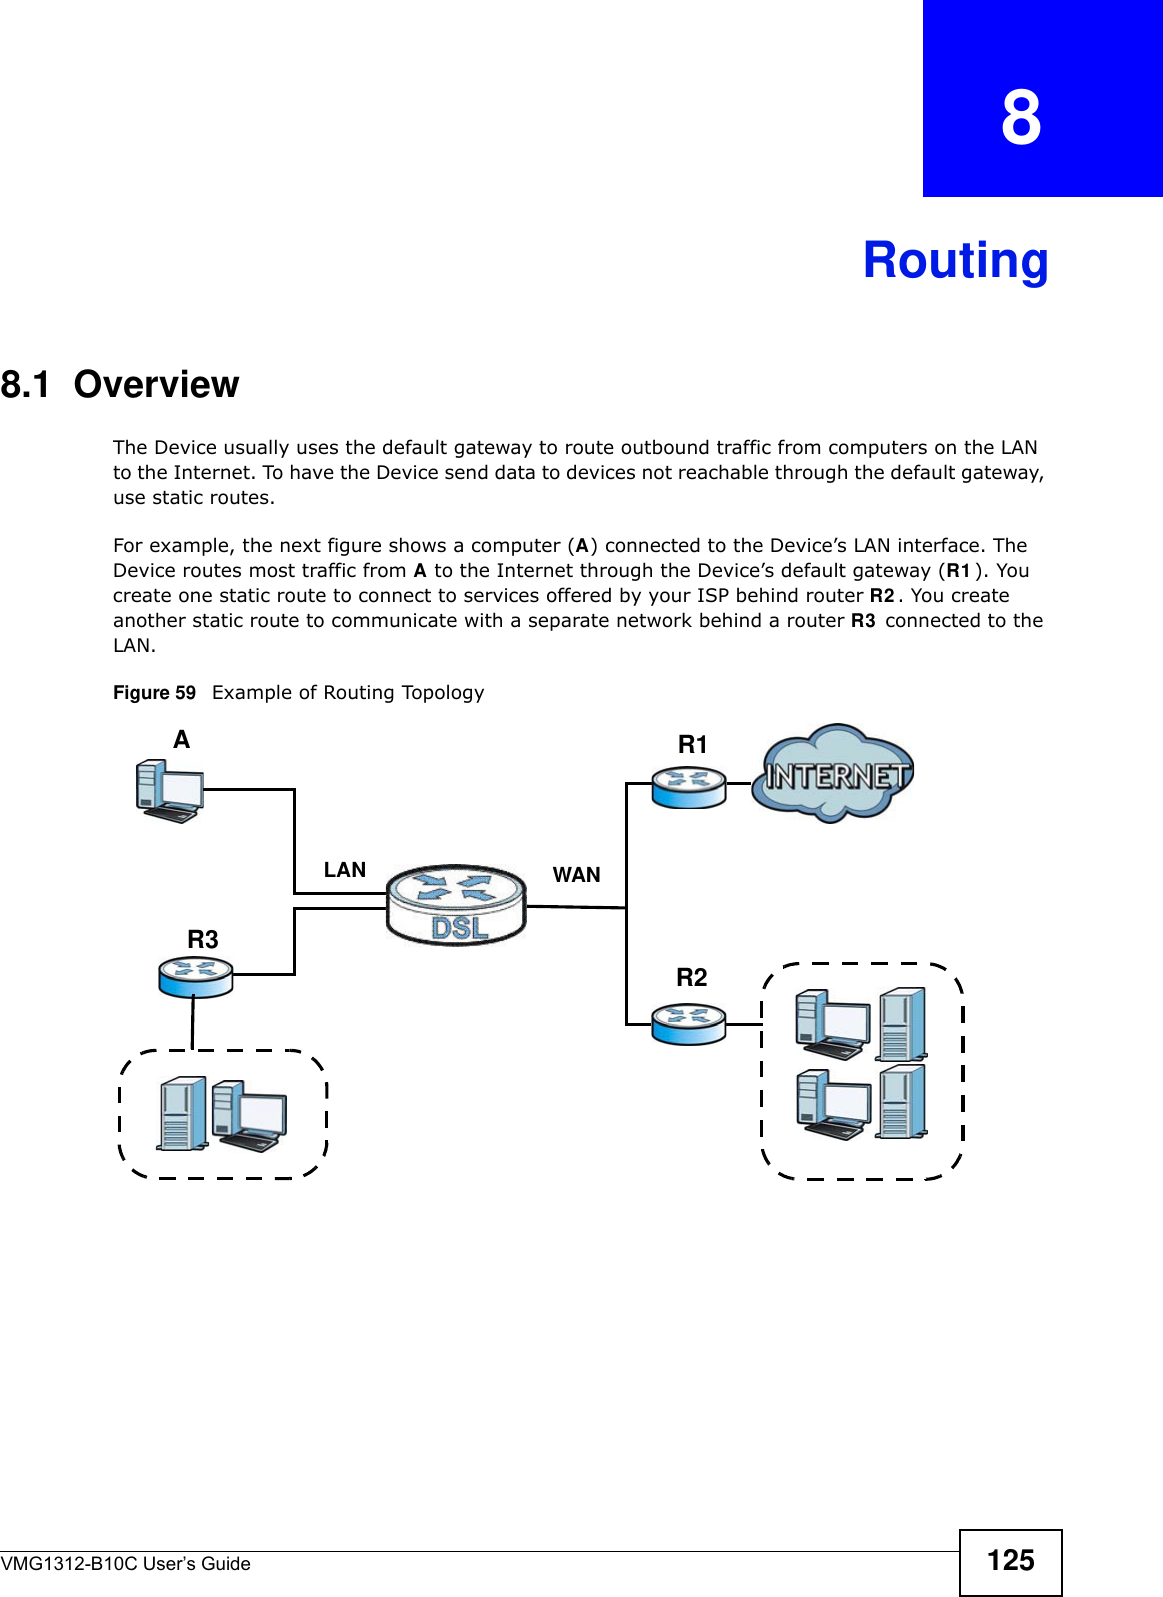 VMG1312-B10C User’s Guide 125CHAPTER   8Routing8.1  Overview The Device usually uses the default gateway to route outbound traffic from computers on the LAN to the Internet. To have the Device send data to devices not reachable through the default gateway, use static routes.For example, the next figure shows a computer (A) connected to the Device’s LAN interface. The Device routes most traffic from A to the Internet through the Device’s default gateway (R1 ). You create one static route to connect to services offered by your ISP behind router R2 . You create another static route to communicate with a separate network behind a router R3  connected to the LAN.   Figure 59   Example of Routing TopologyWANR1R2AR3LAN